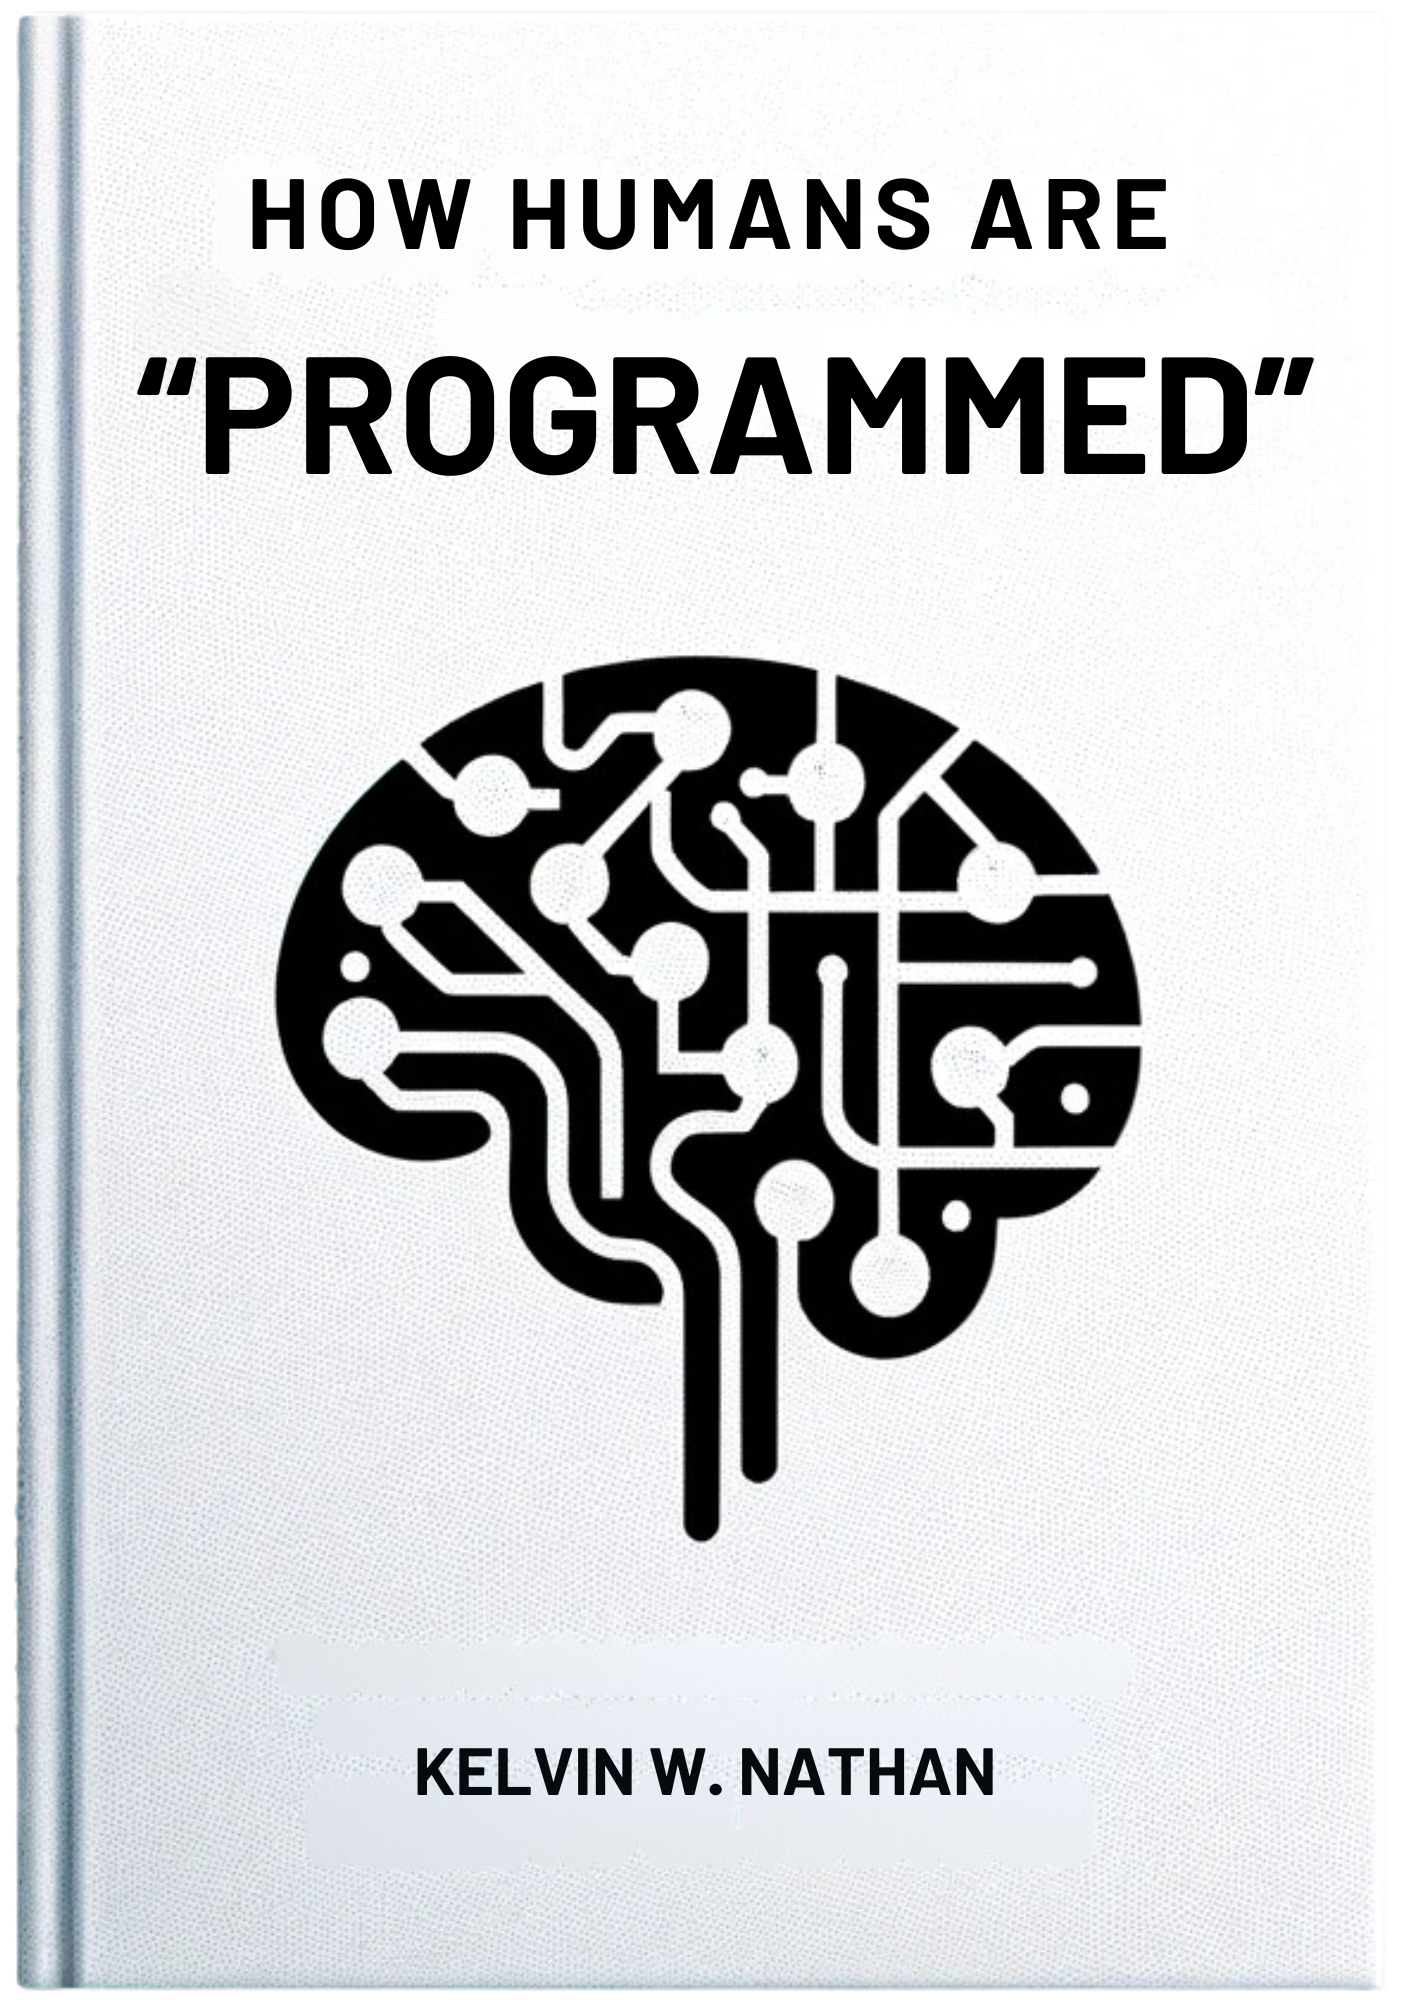 How Humans are "Programmed" for Success